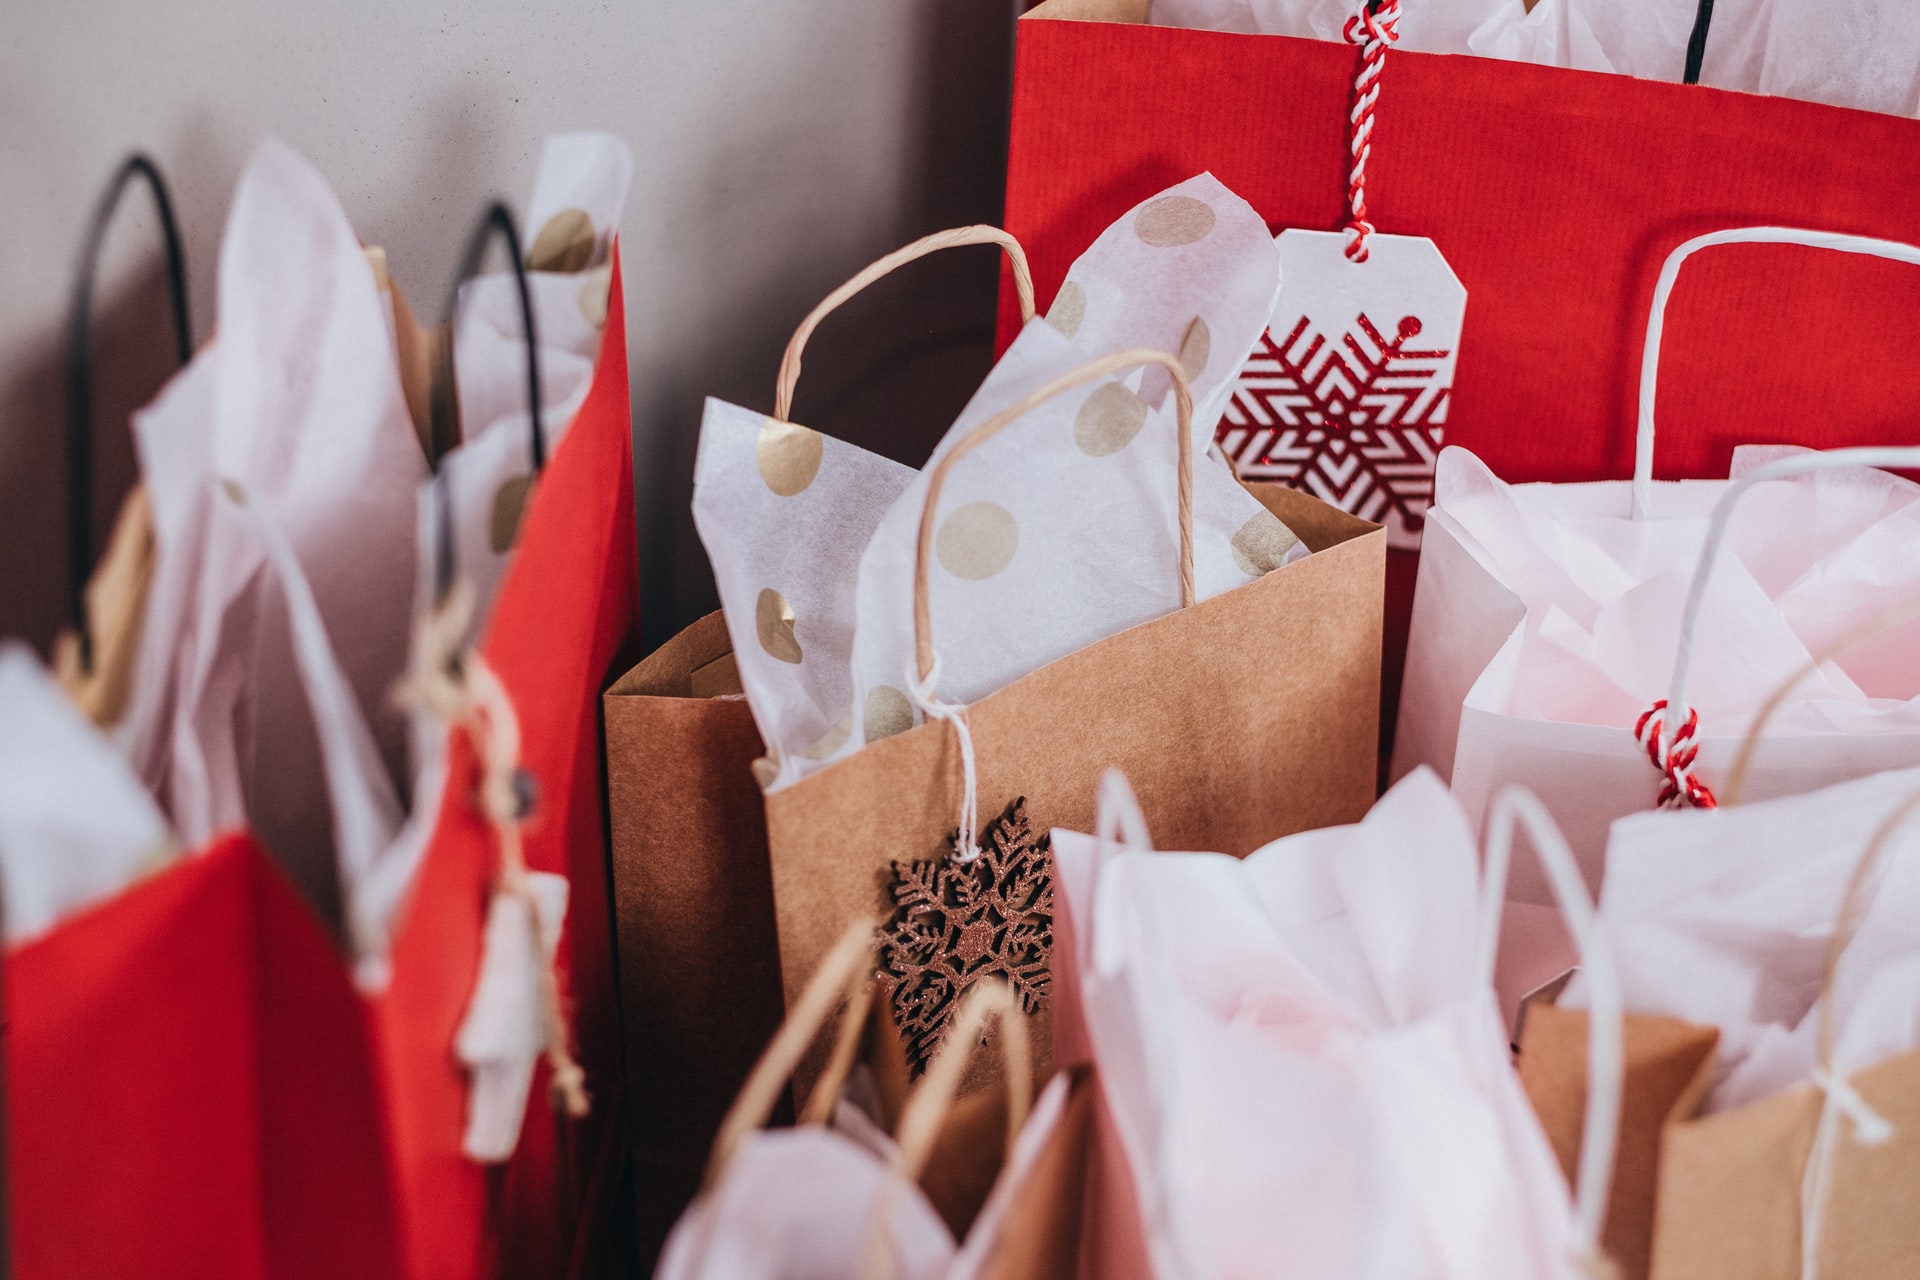 How to Use Tissue Paper in a Gift Bag (and Make It Look Good